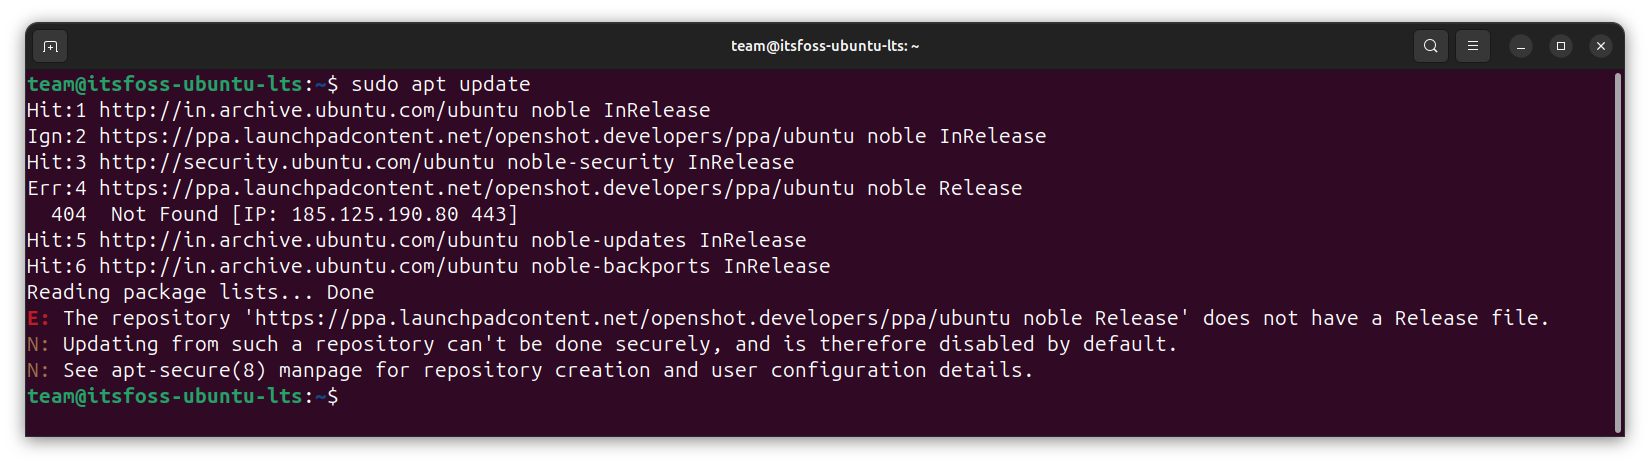 If a PPA is not available for the current version of Ubuntu, it will show an error.